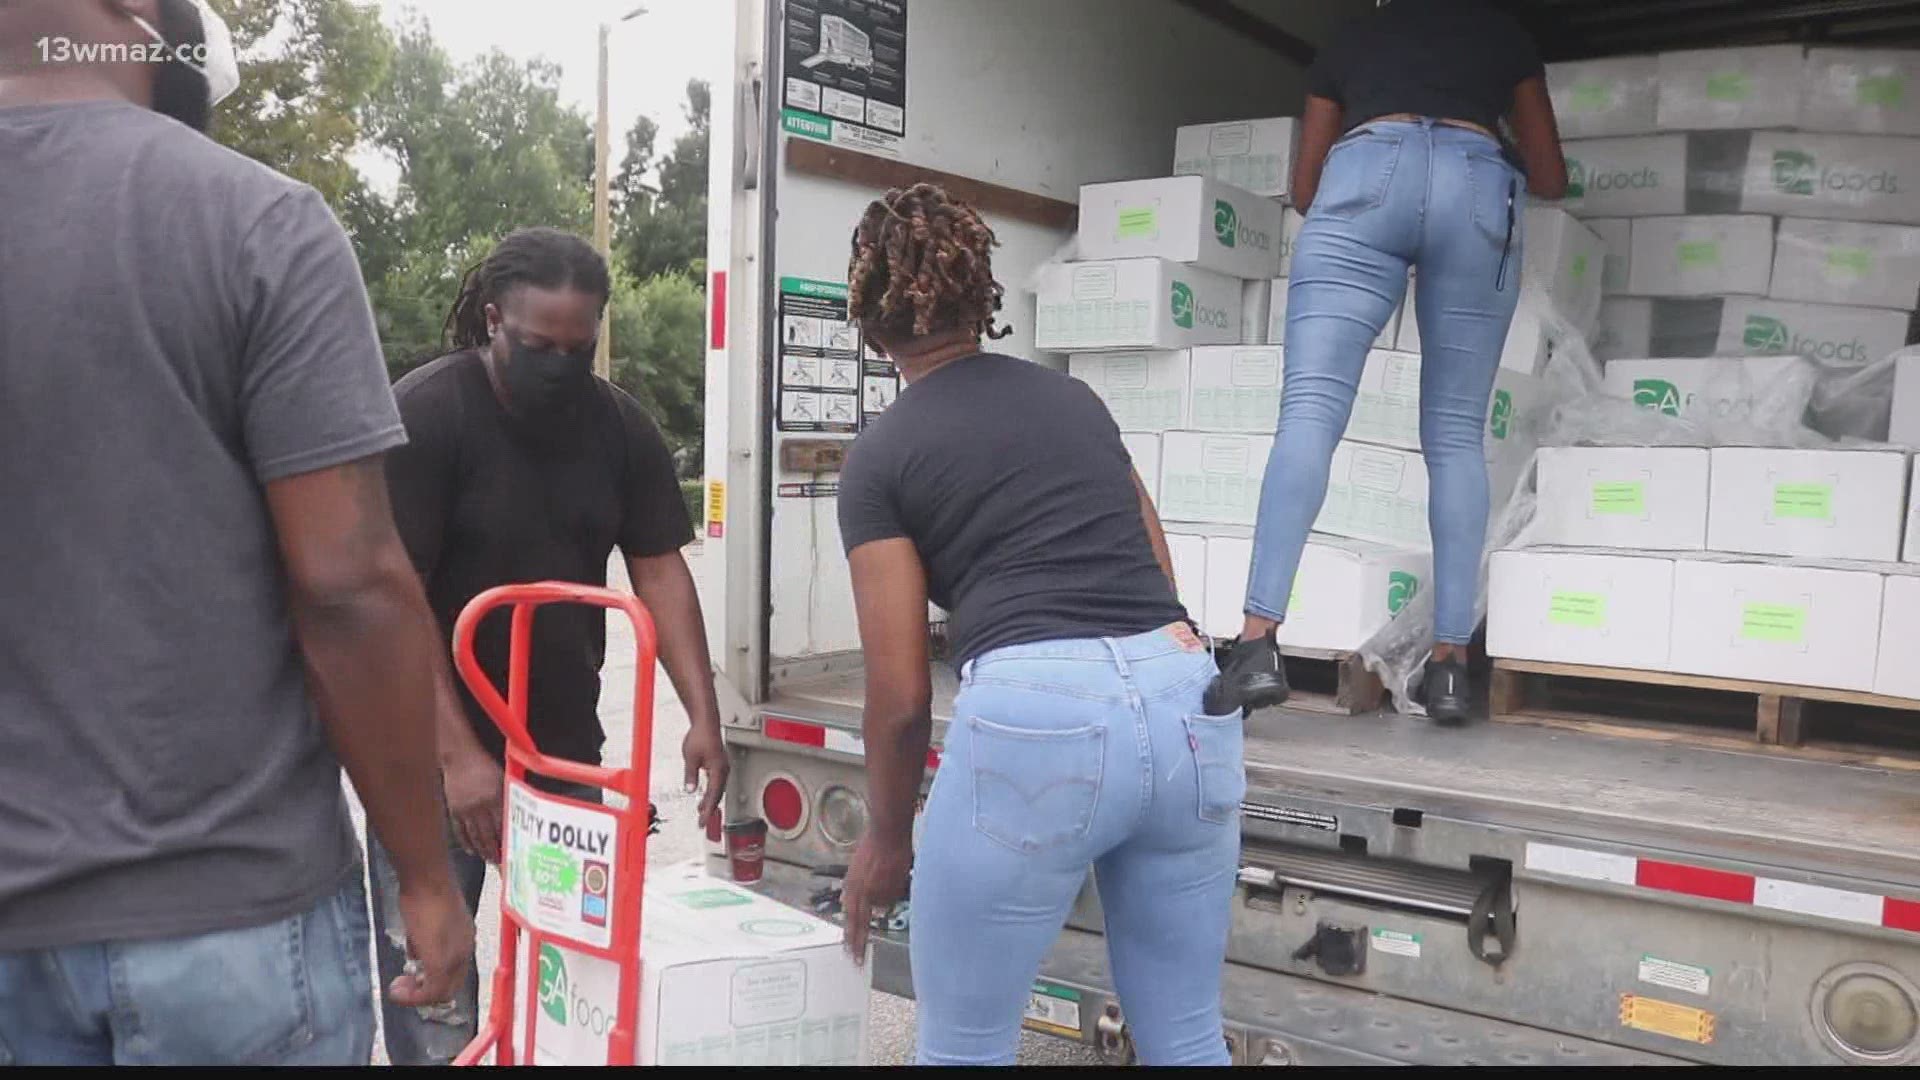 The Melanated Community Stimulation Project hosted the first of many food drives after receiving a grant from the USDA to feed local families in need.